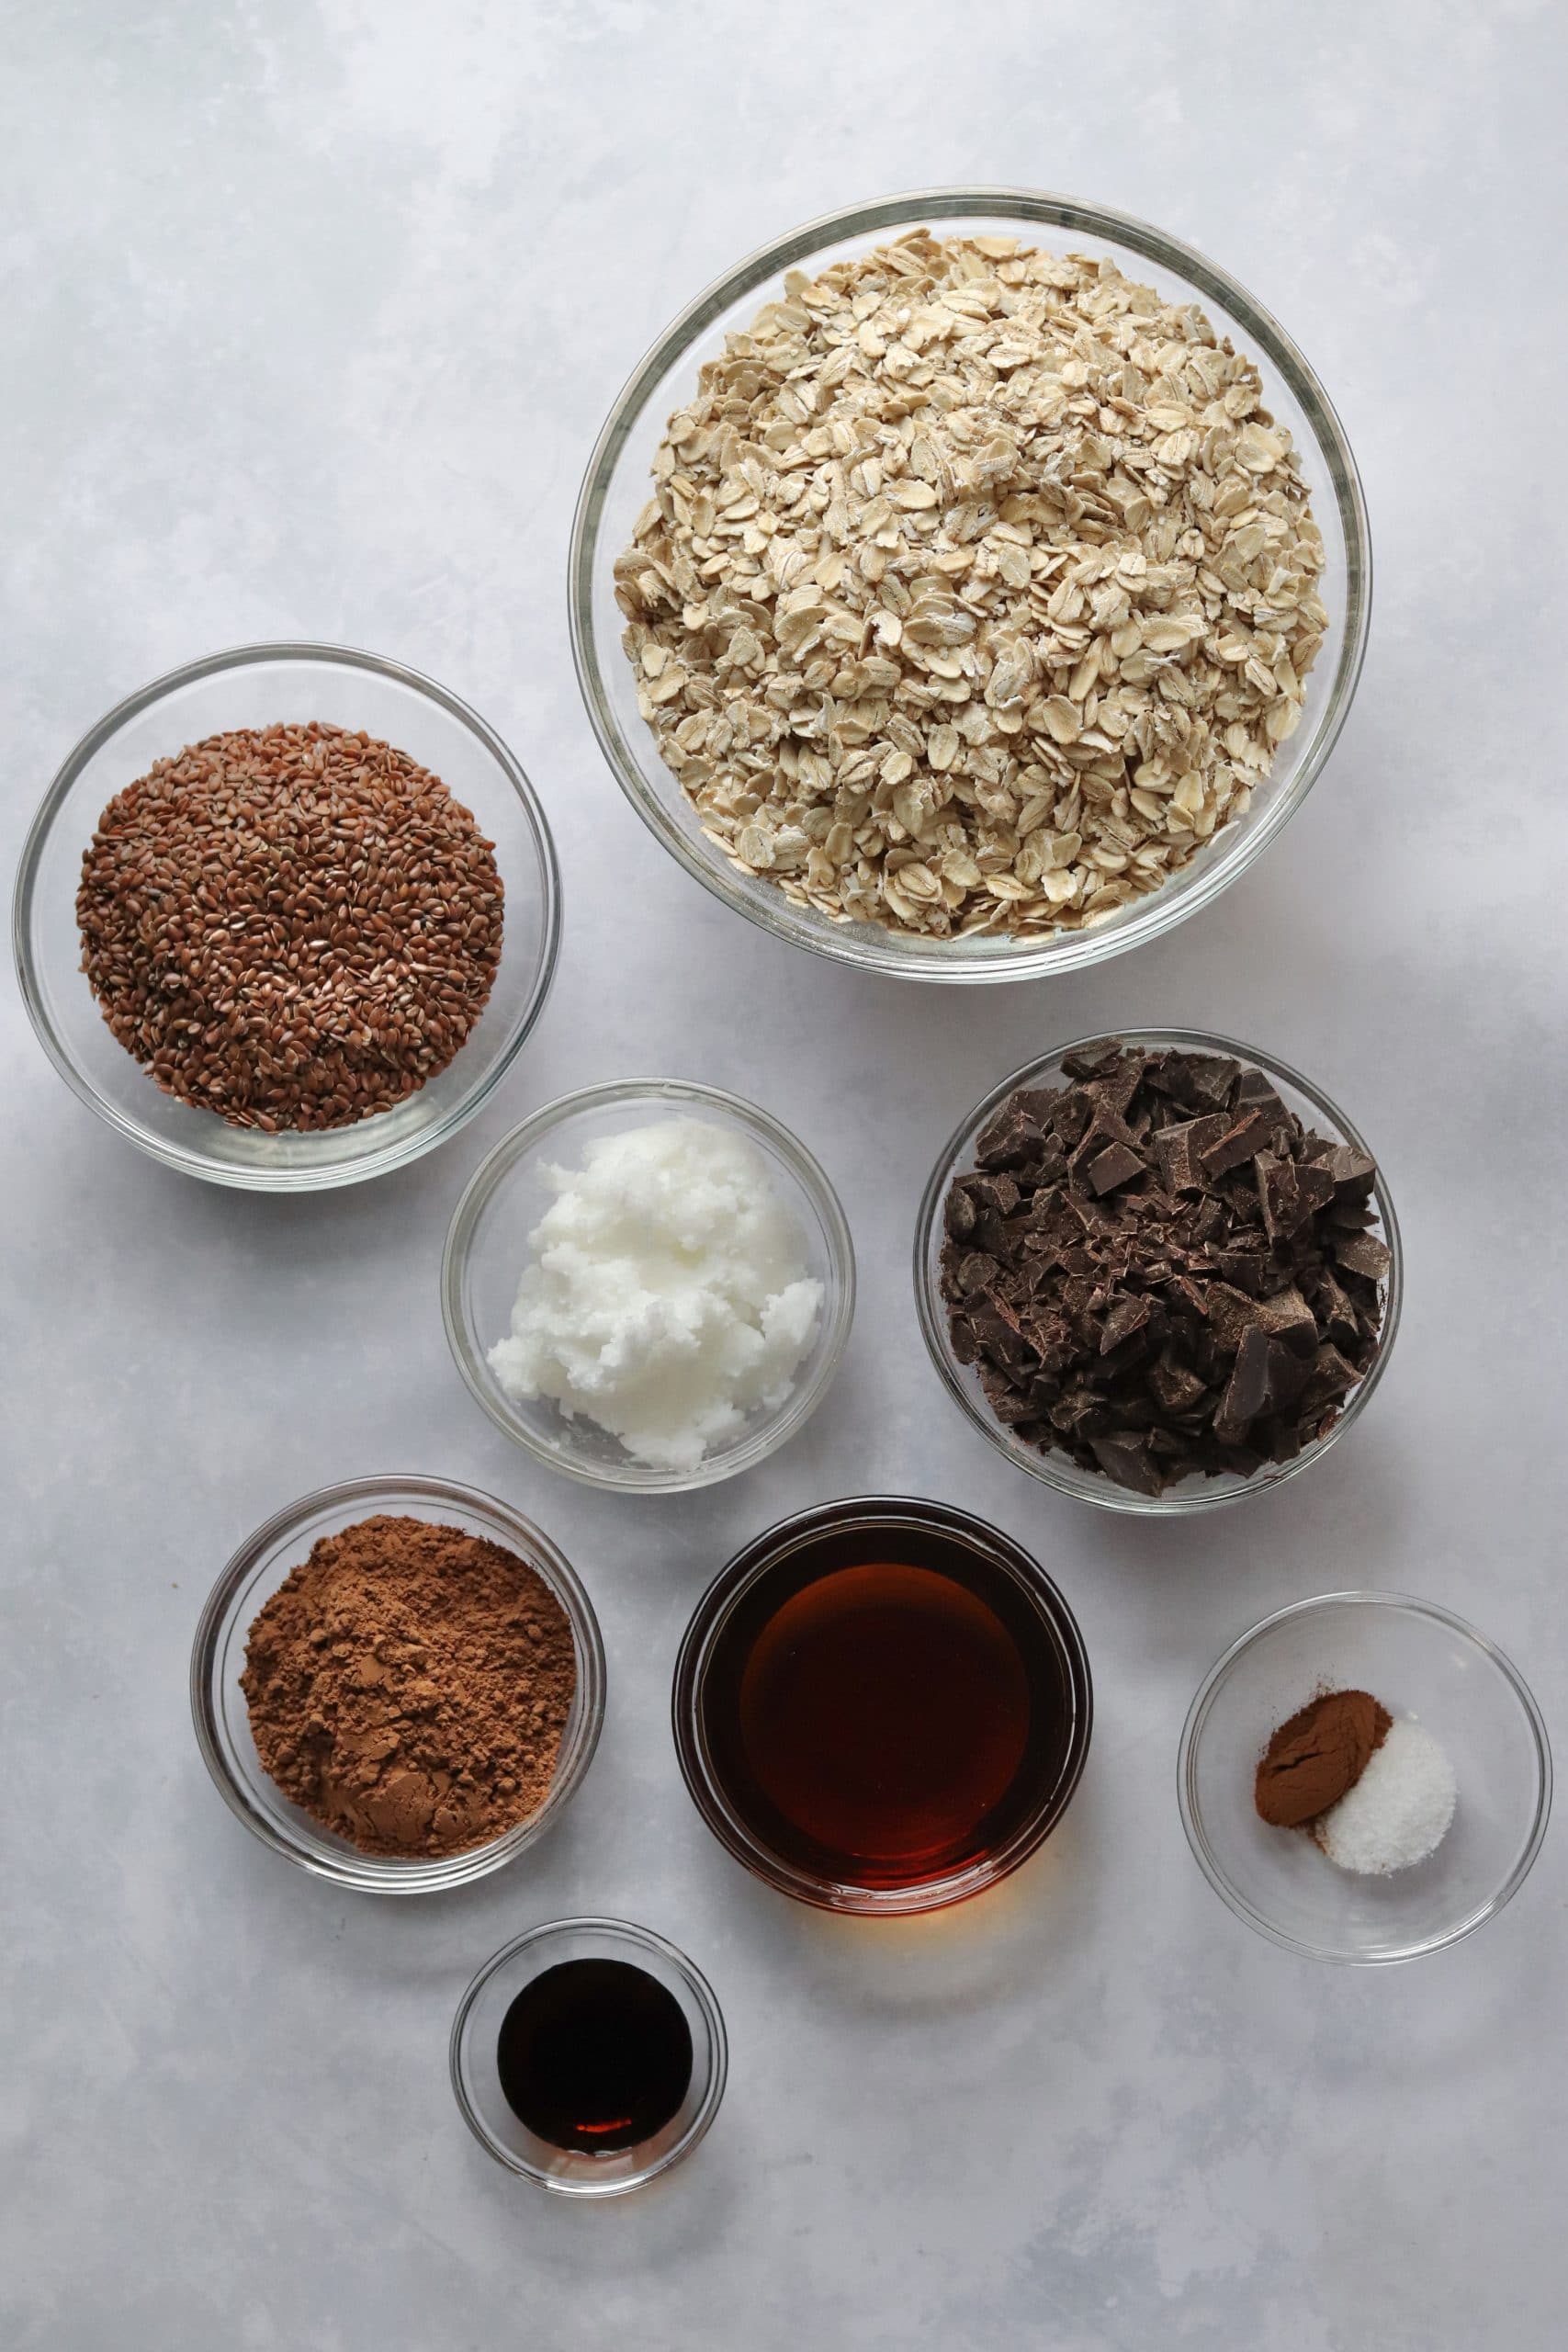 Chocolate granola ingredients in glass bowls